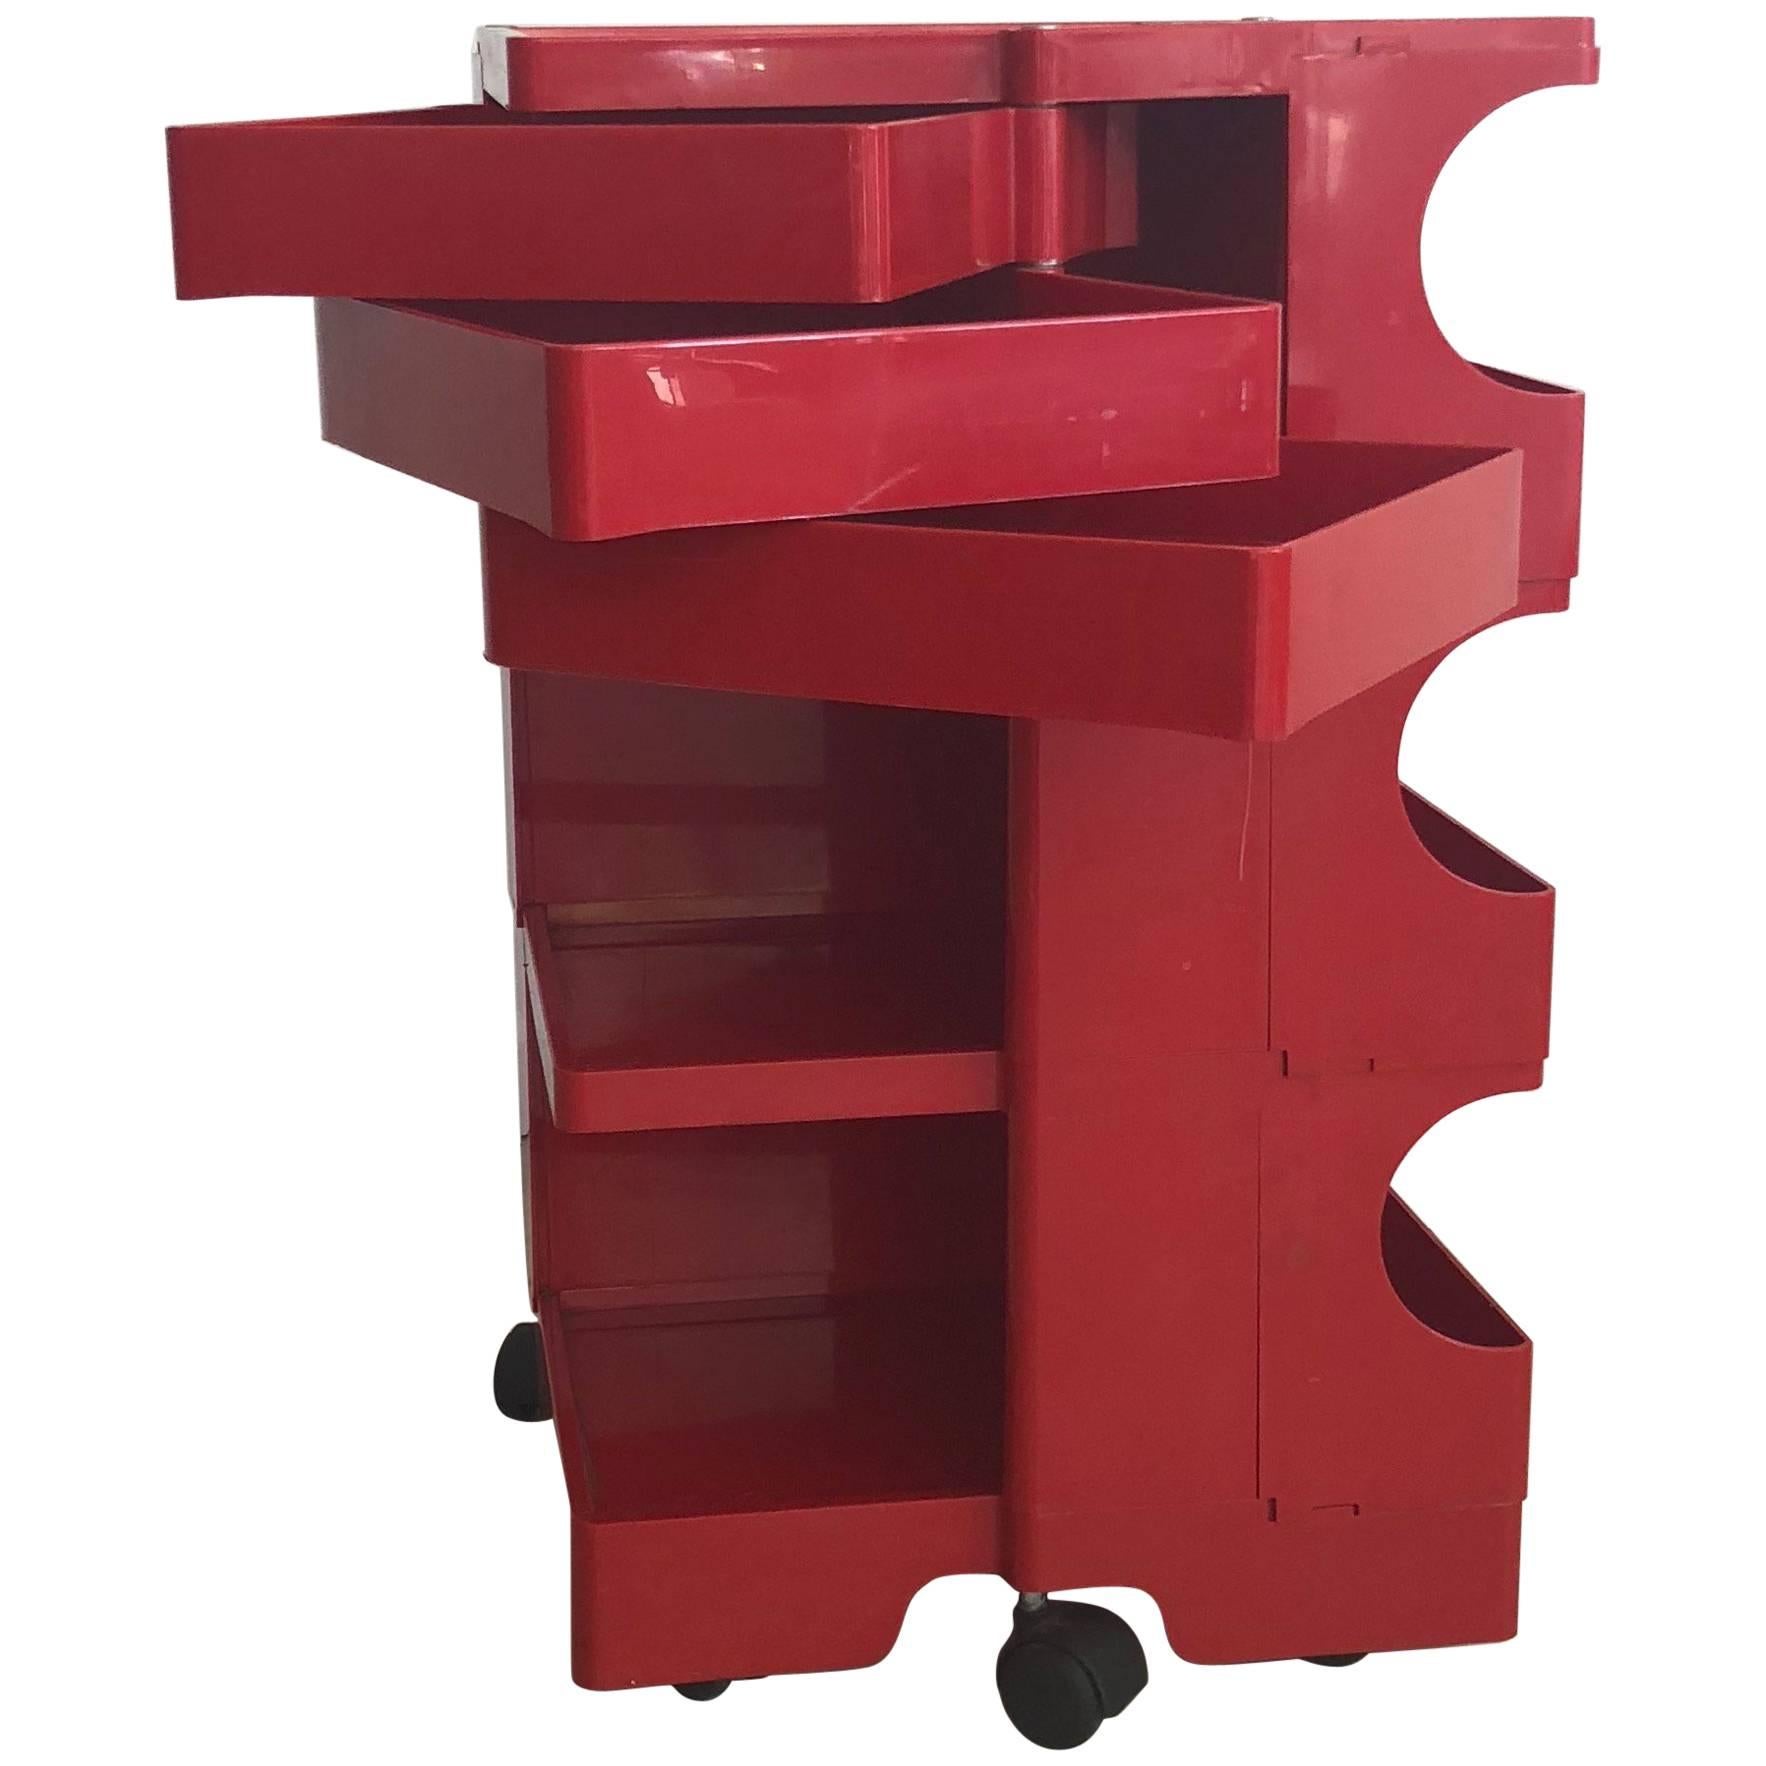 1970s Red Plastic Boby Cart Work Station by Joe Colombo